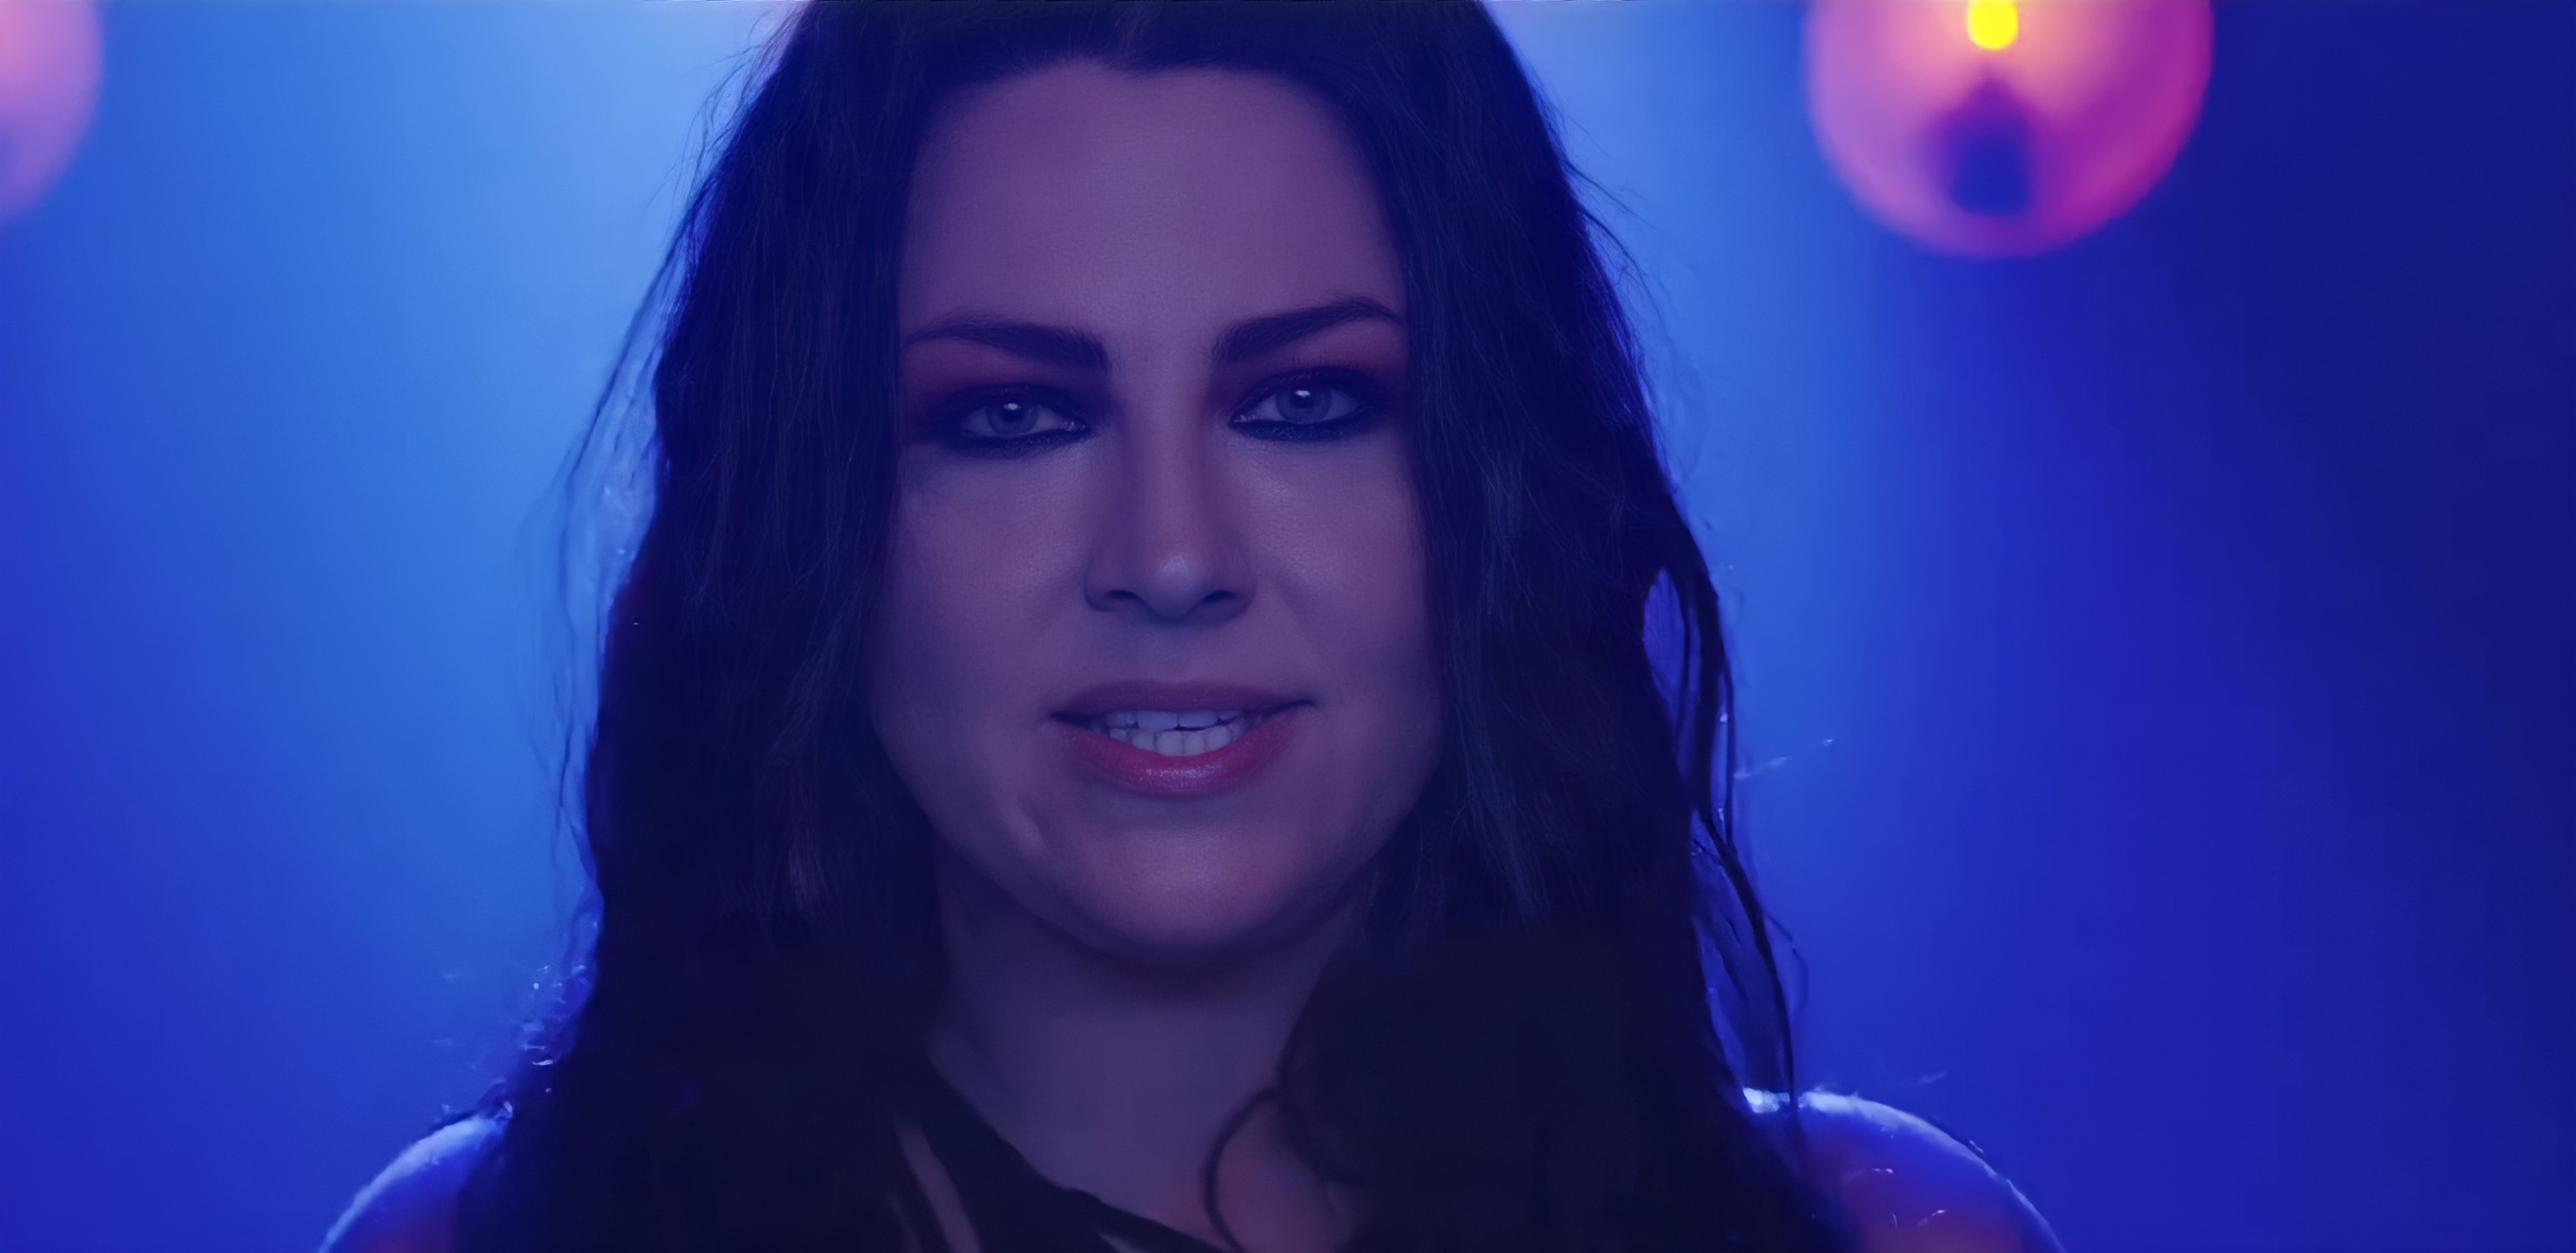 2960x1440
Keywords: better without you;video;amy lee;hq;the bitter truth